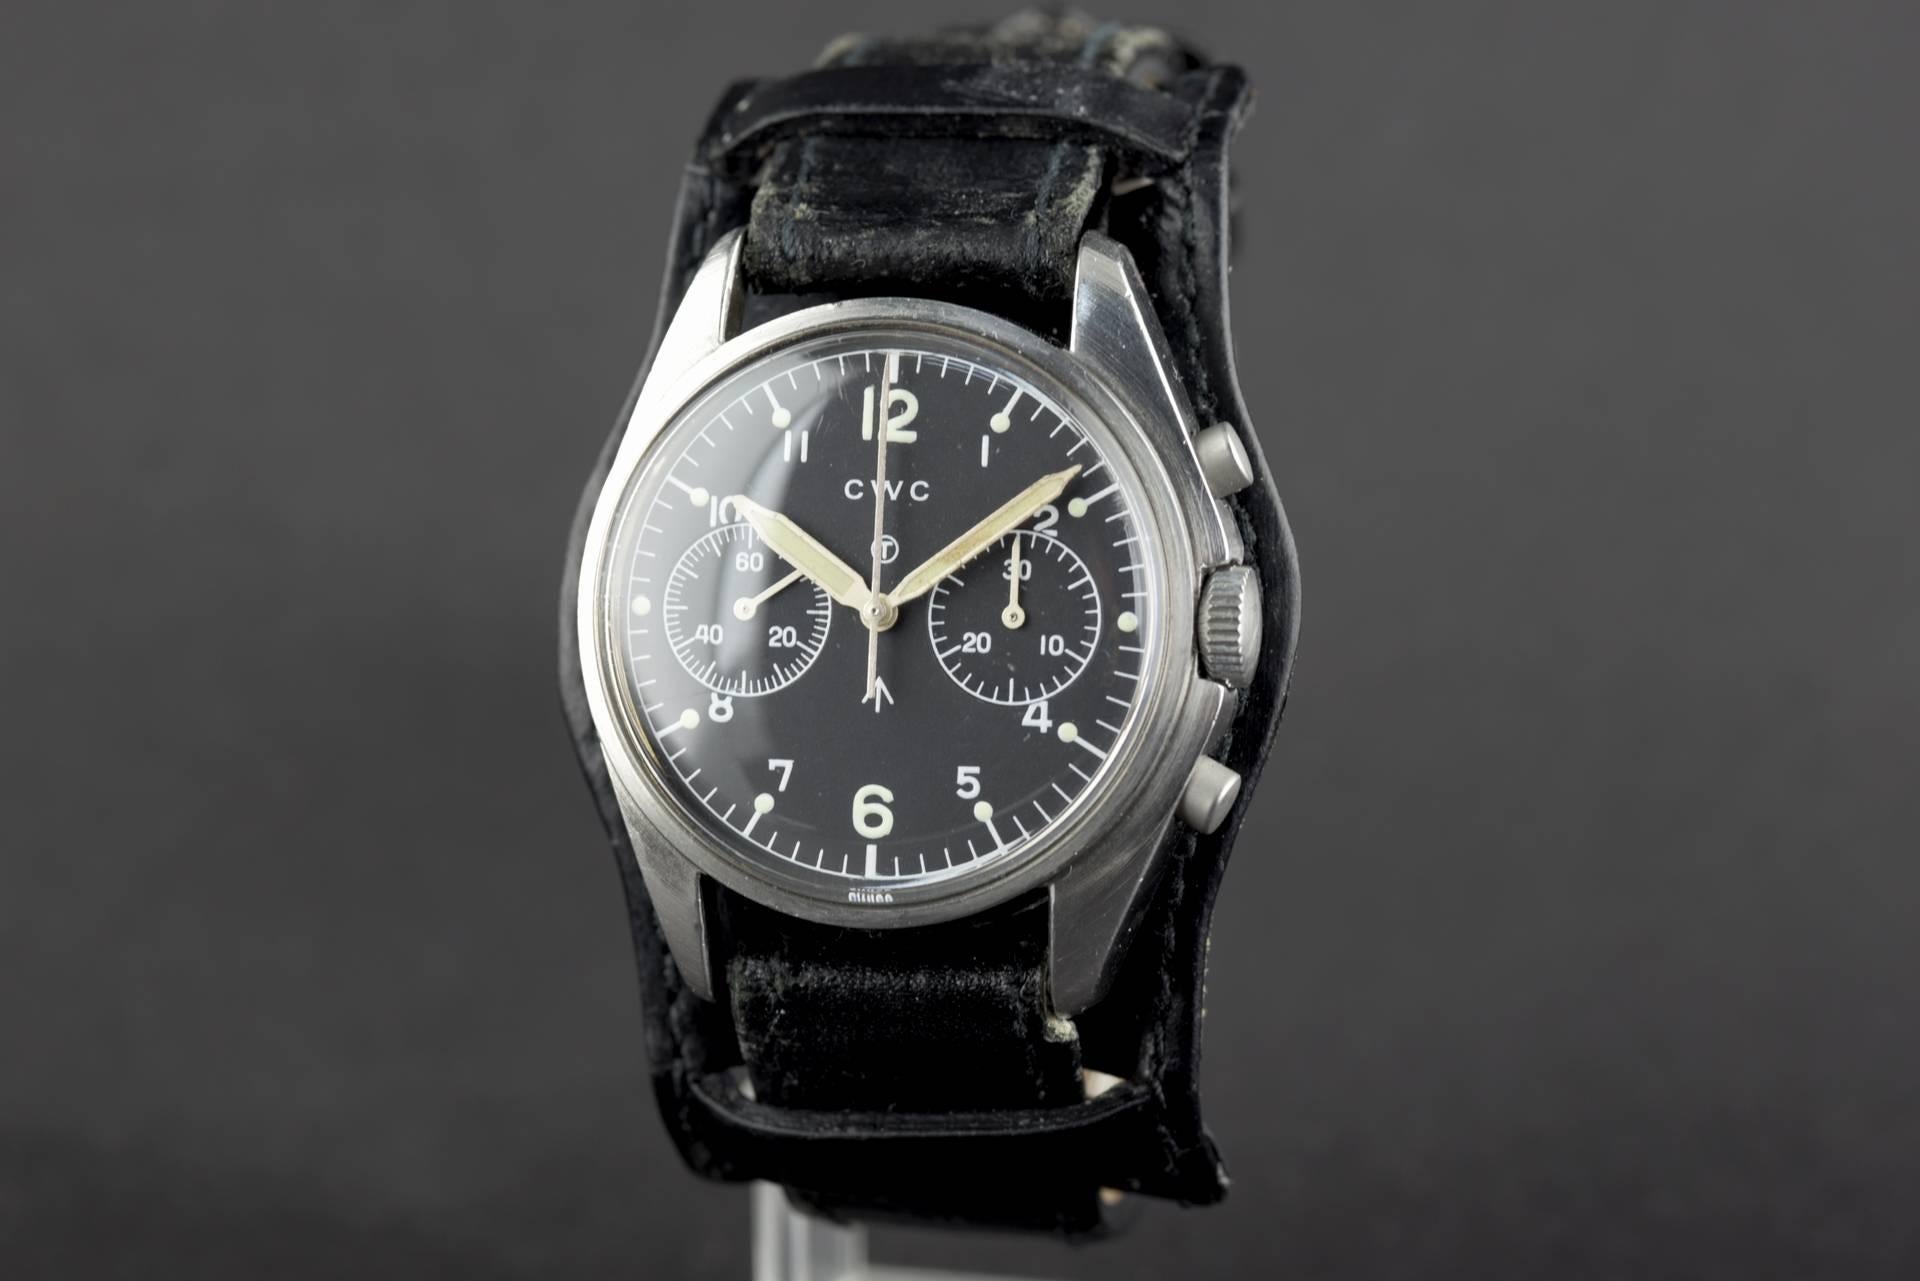 Cortebert CWC Stainless Steel British Airforce Chronograph Wristwatch, 1978 In Excellent Condition For Sale In Berlin, DE